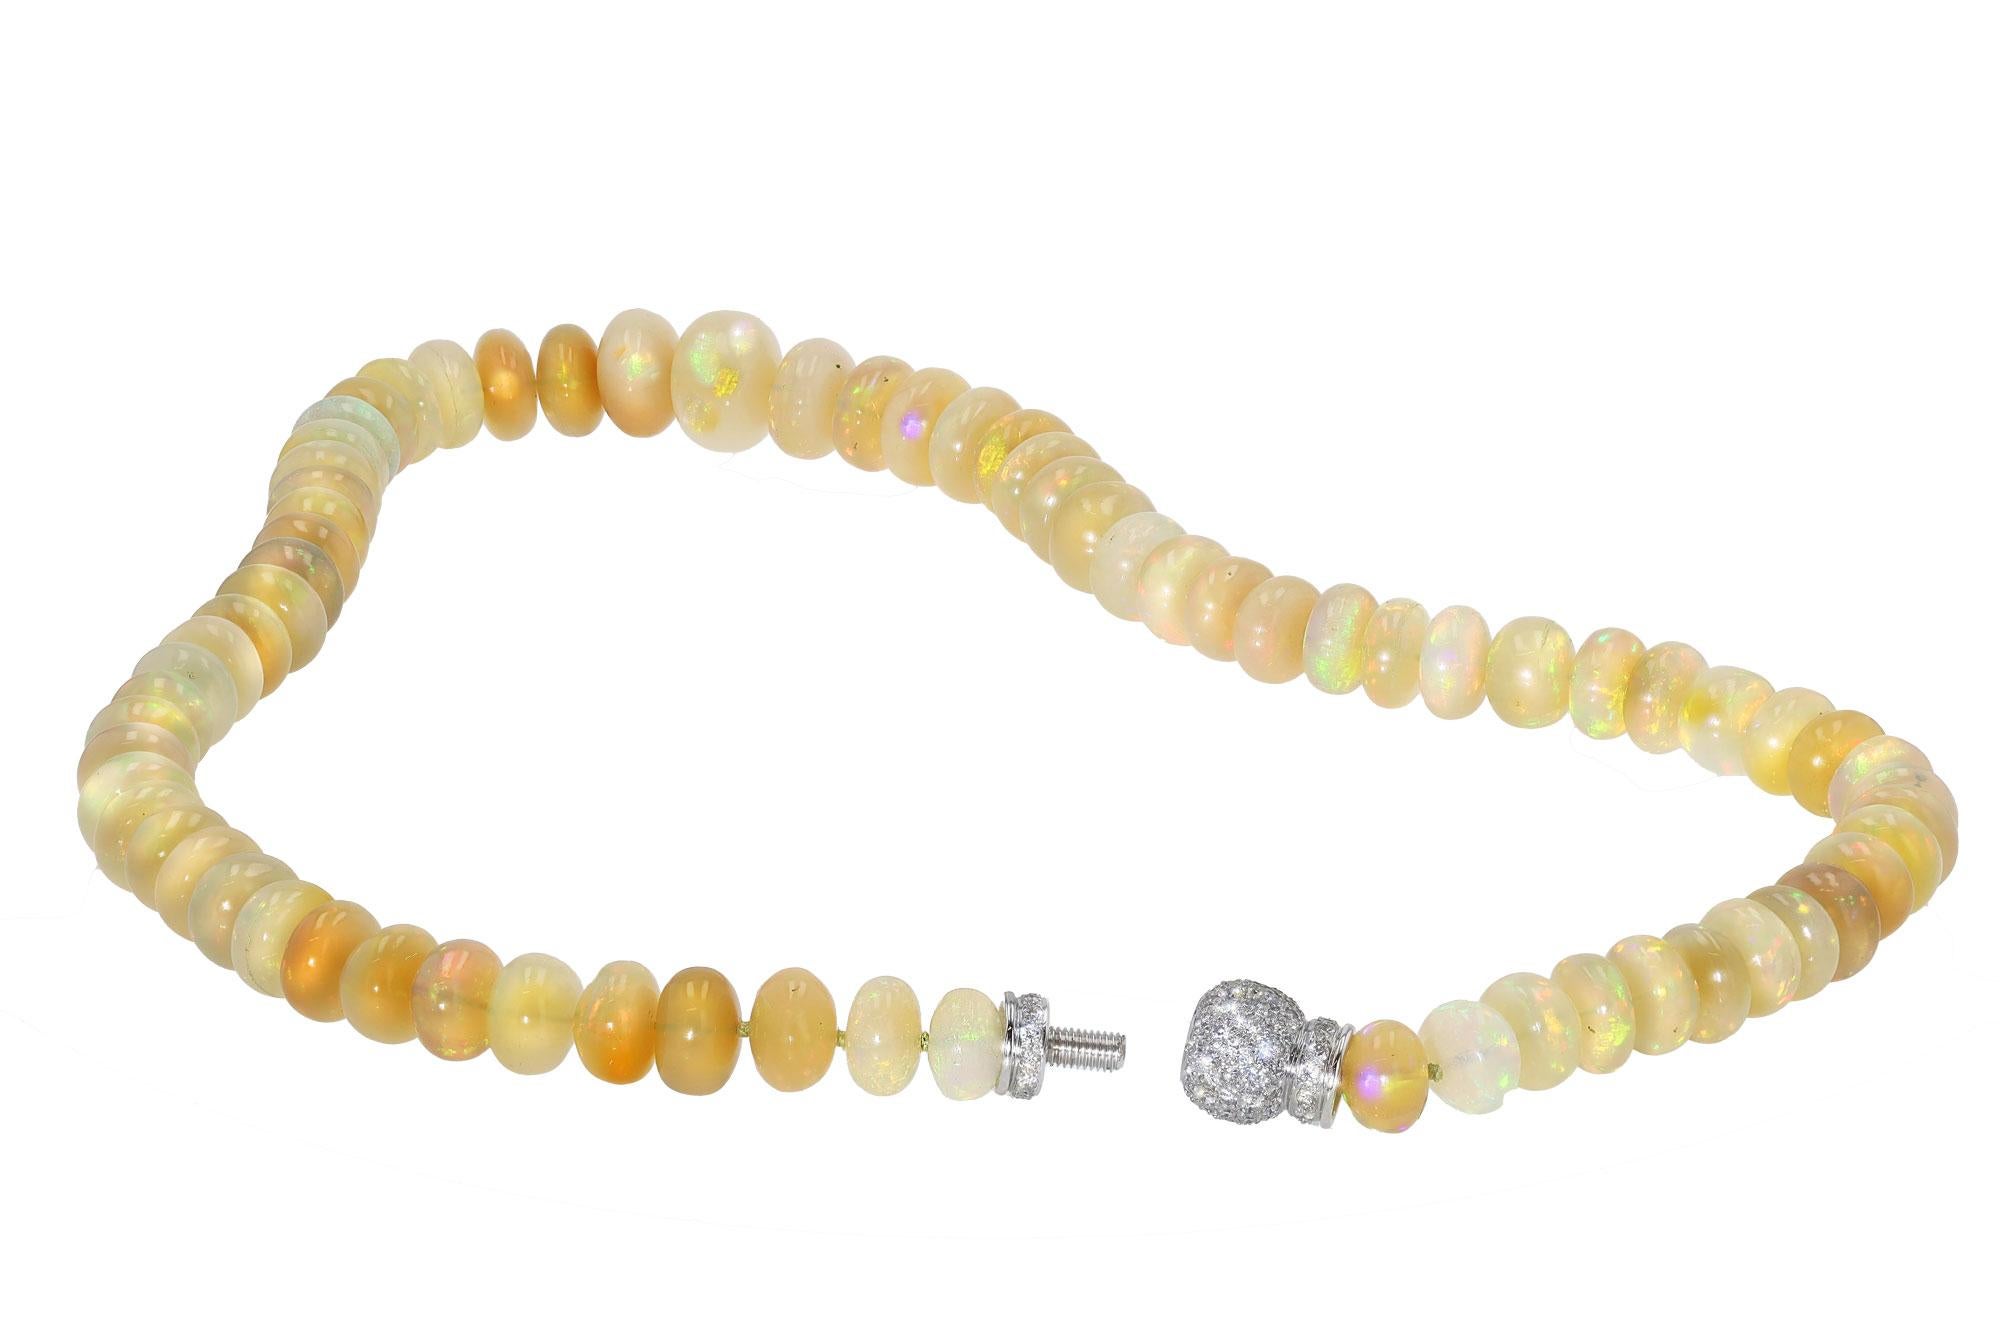 A stunning and dramatic opal bead necklace featuring fiery opals that display excellent play of color, creating a magical feeling for the wearer and onlookers. Each gem has been meticulously matched to create a stunning and close-knit statement with